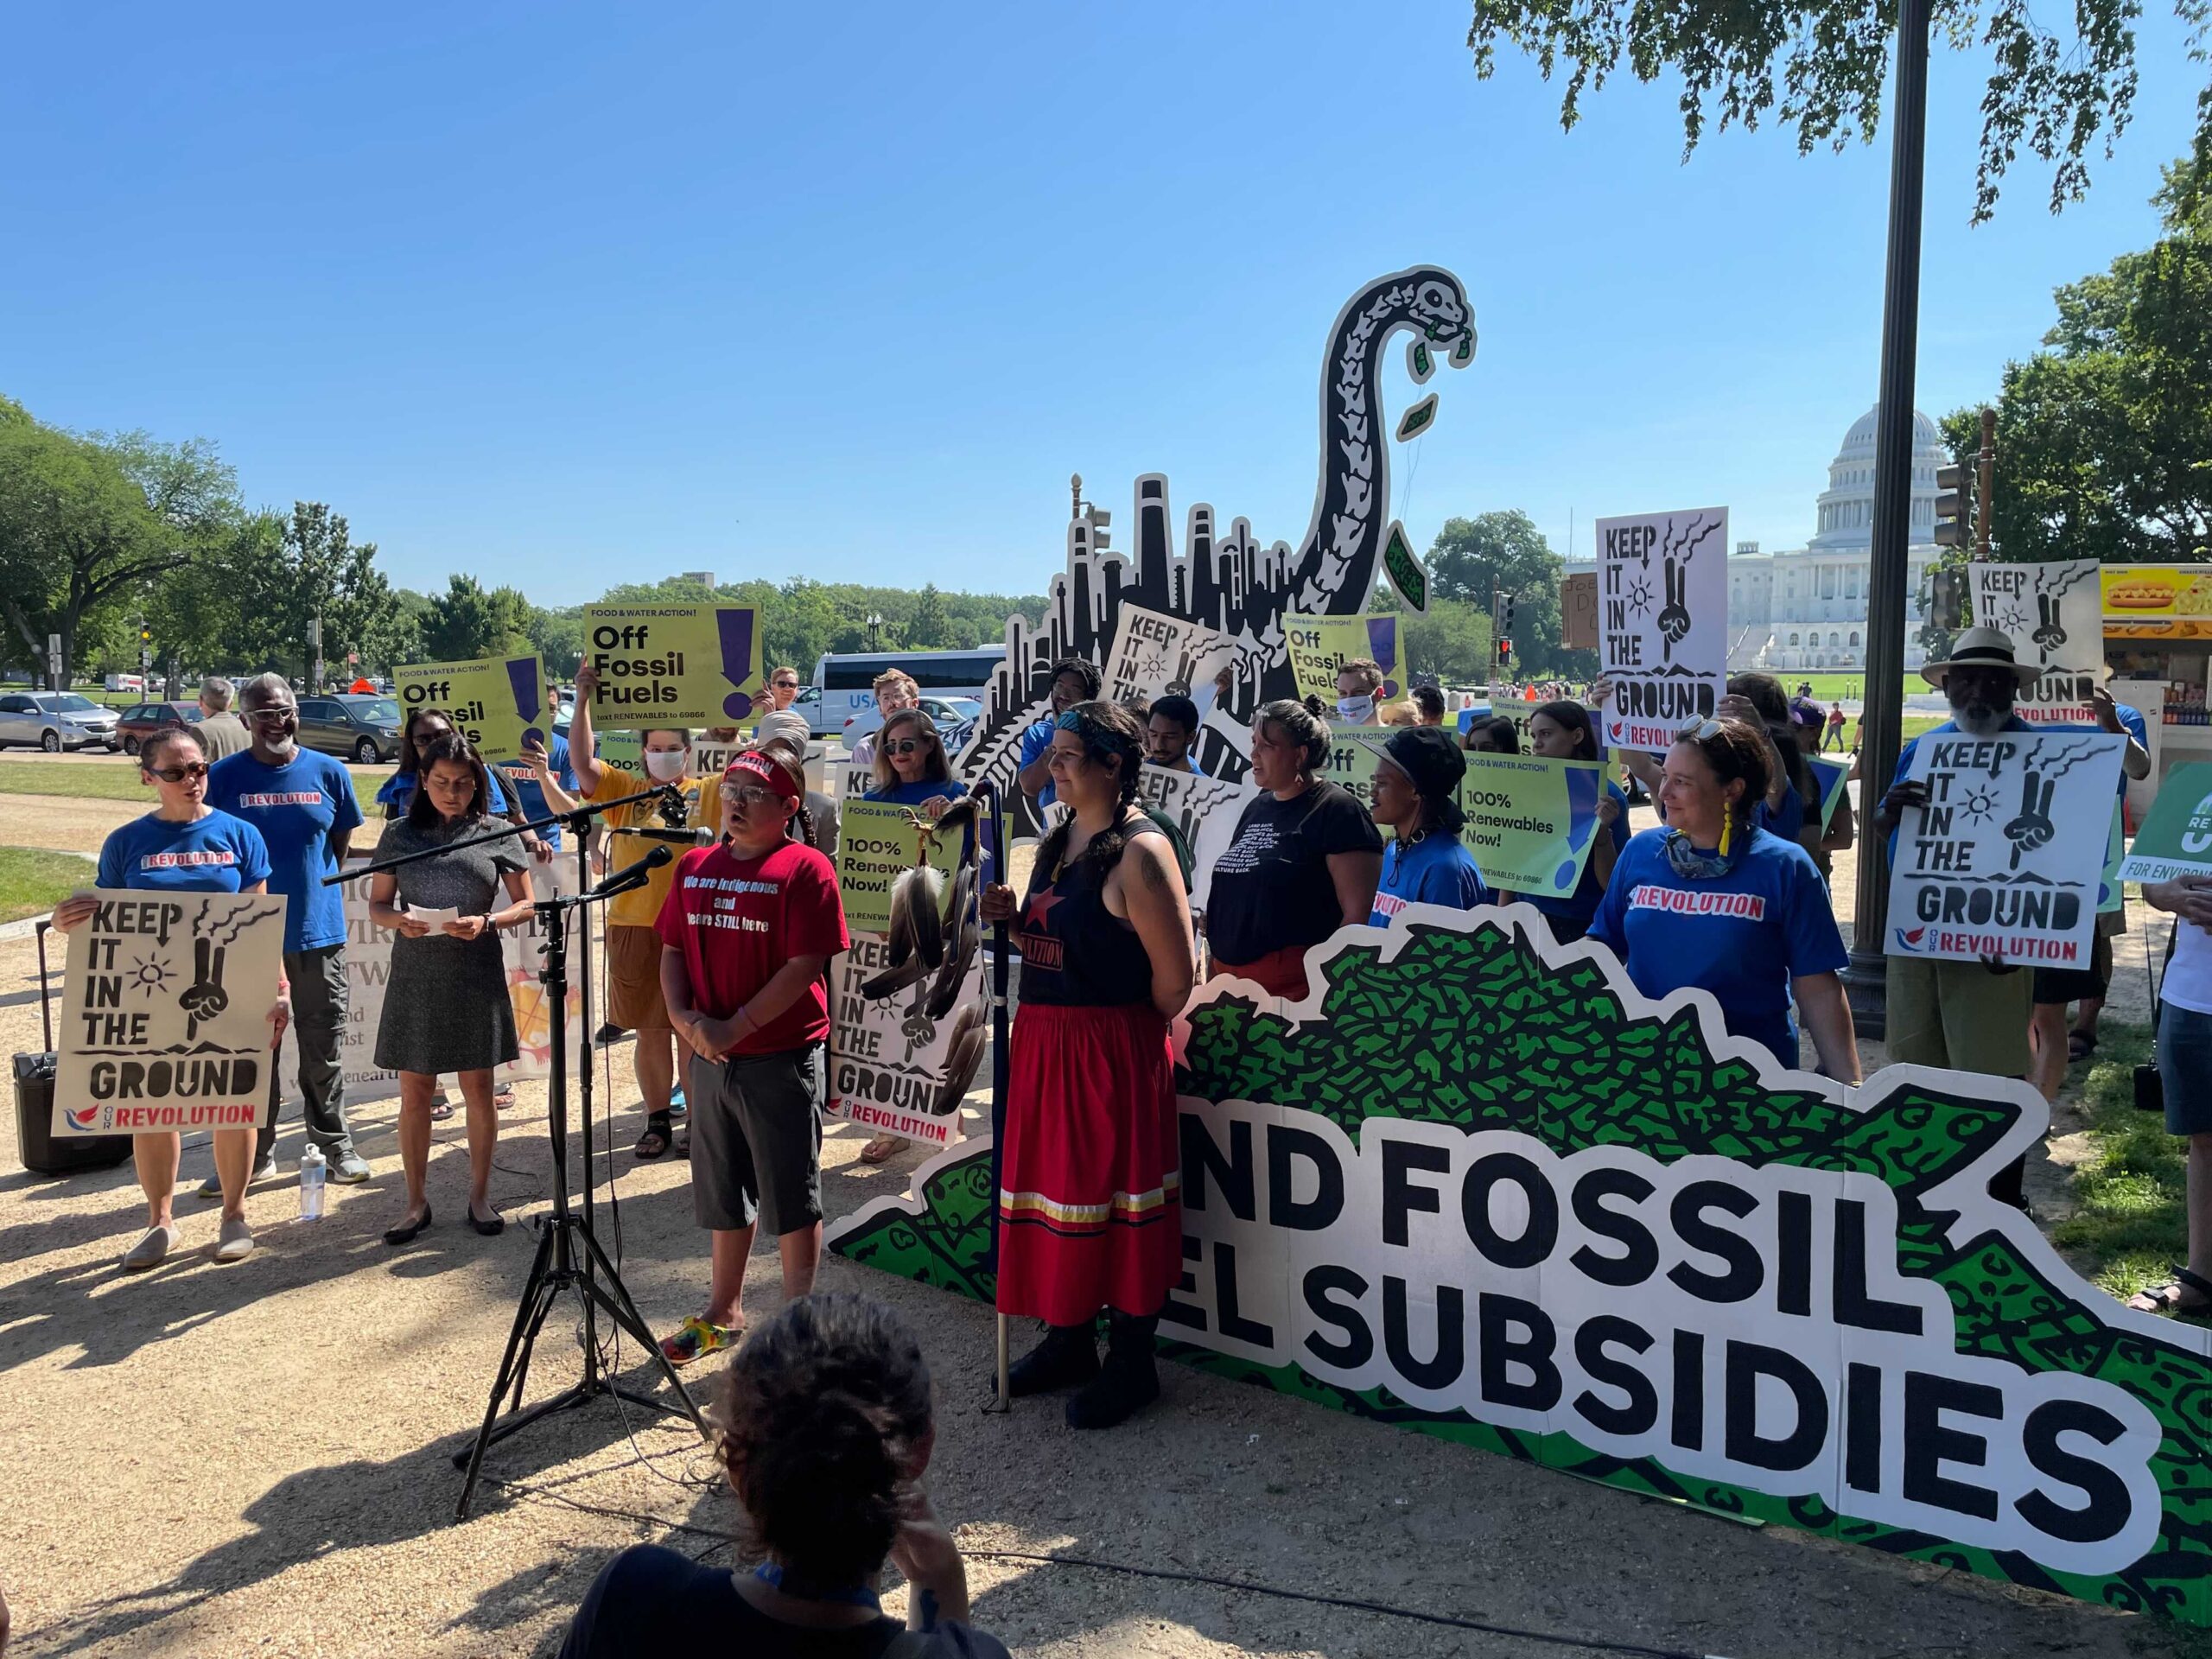 Over 500 Groups Call on Congress to End Fossil Fuel Subsidies with Letter, Rally, Petitions in Week of Action